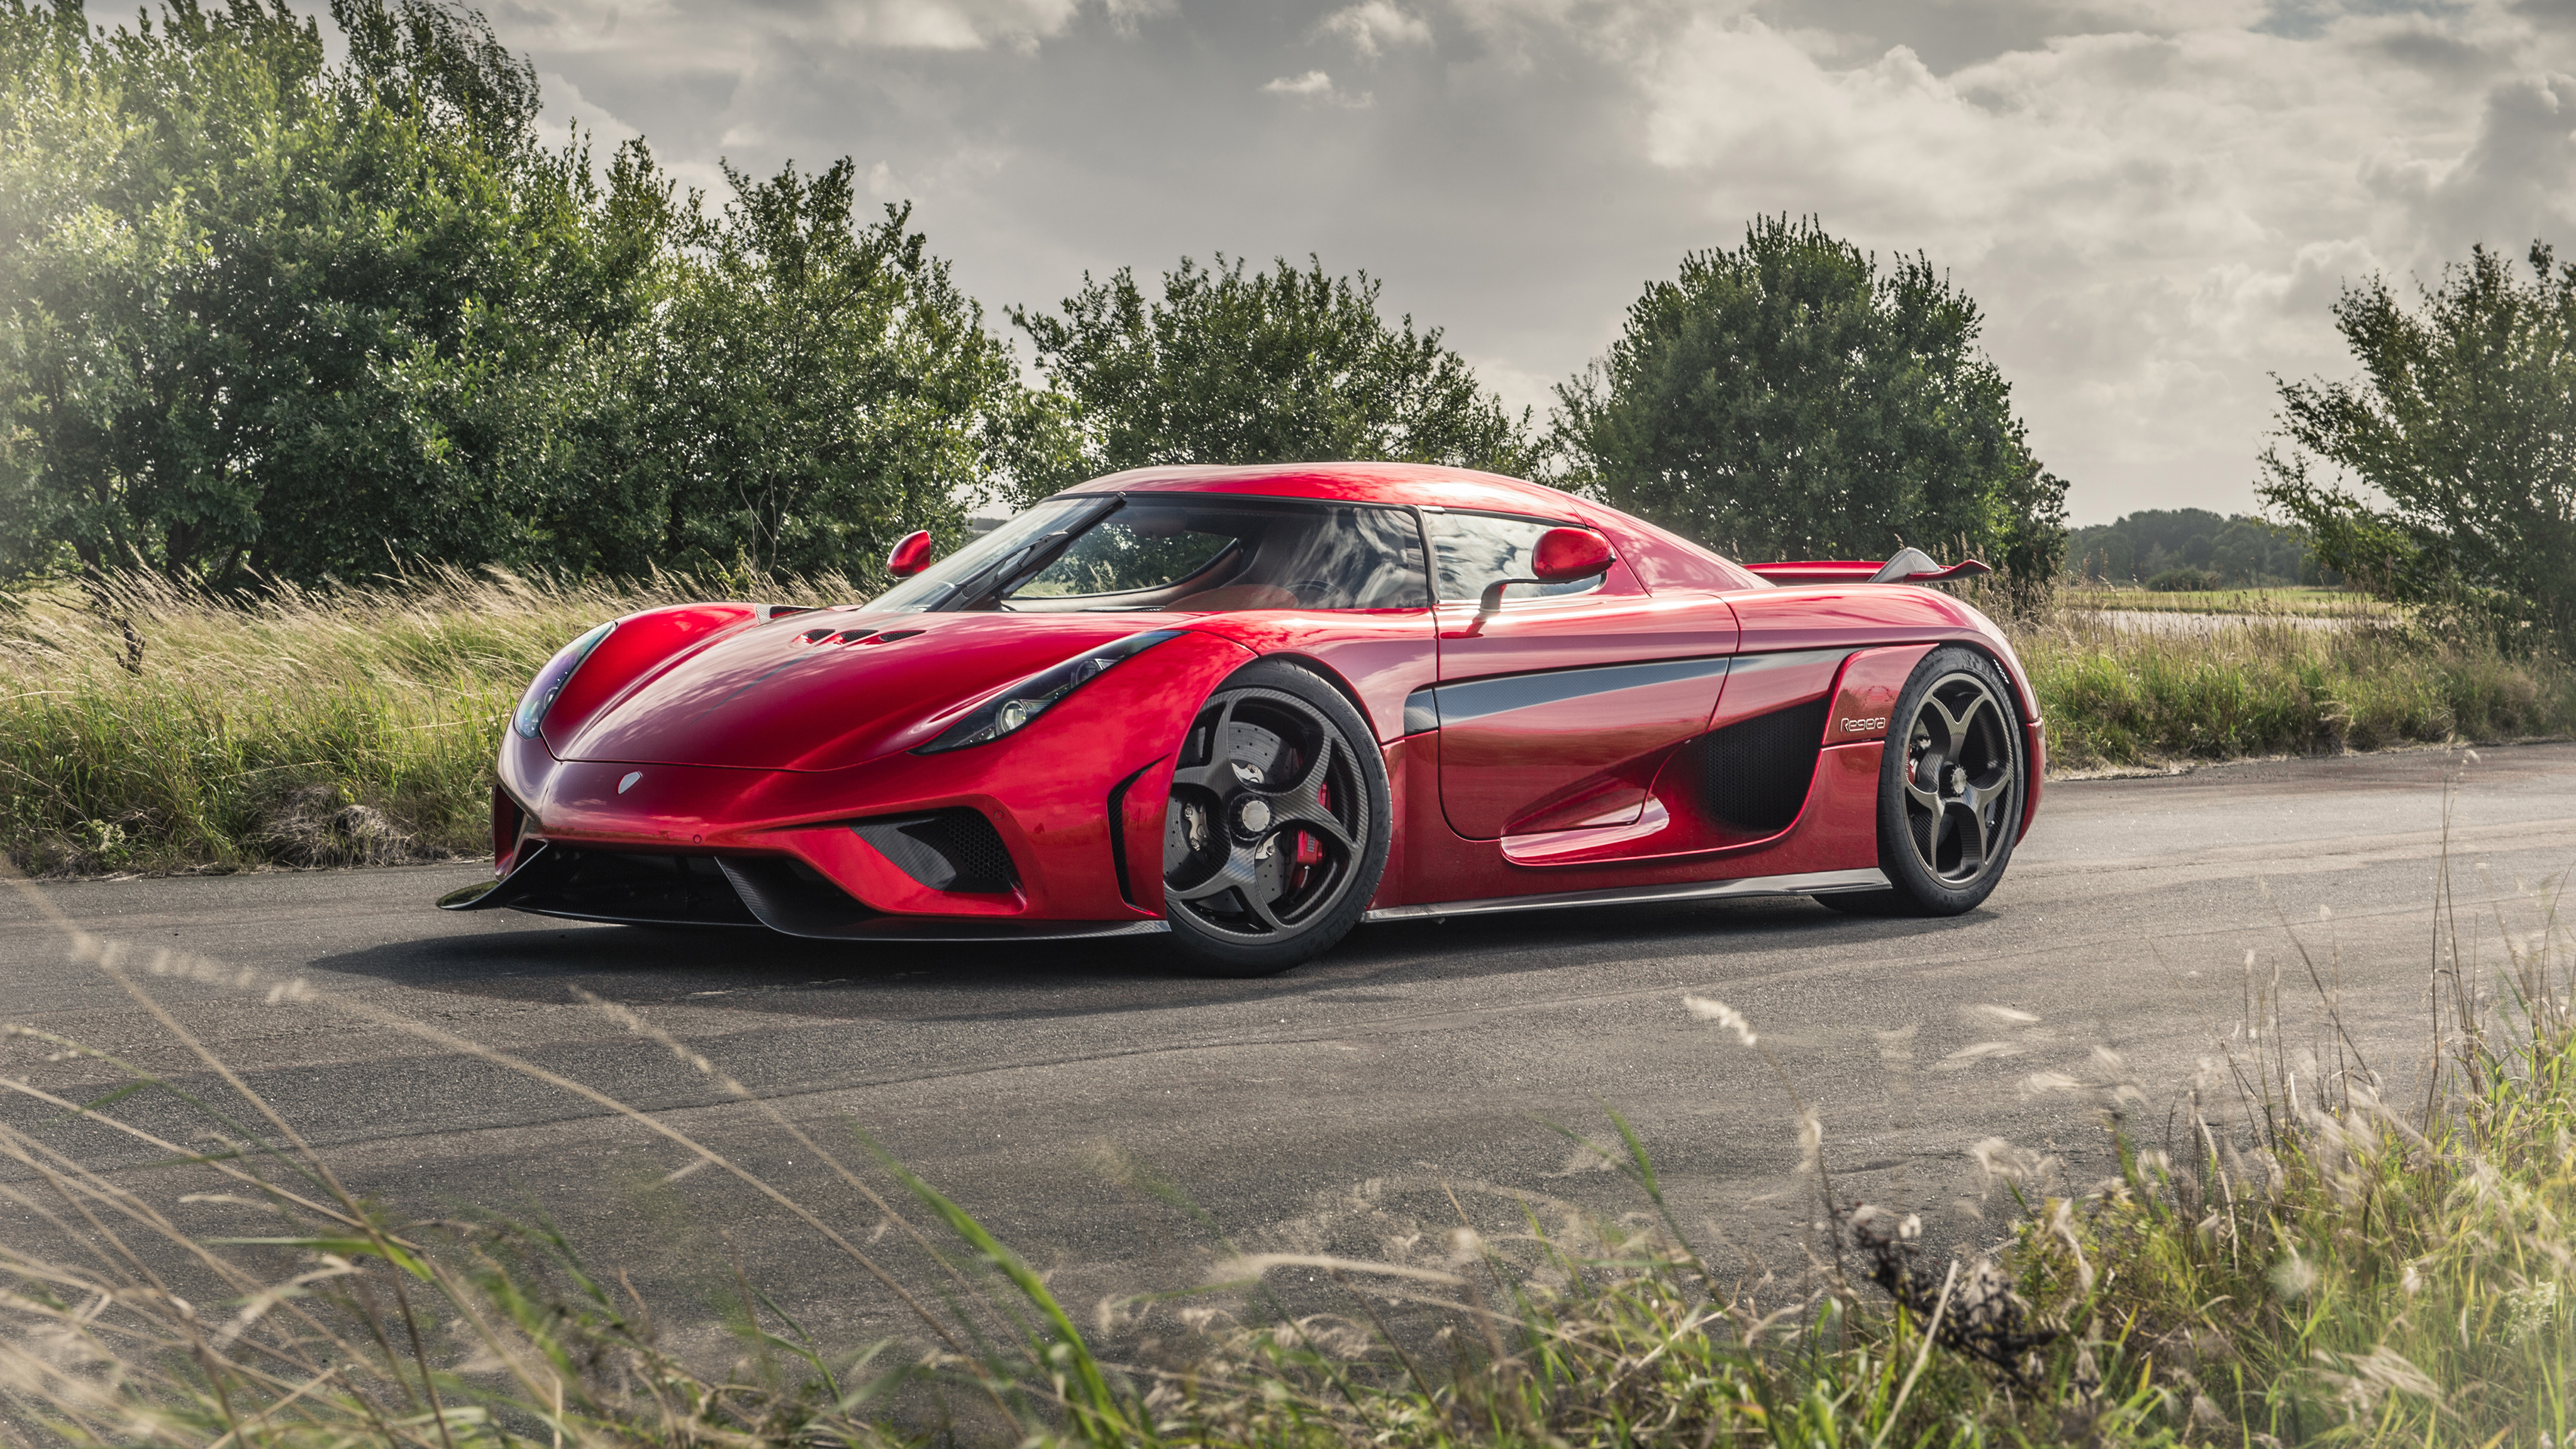 Red Sports Car Koenigsegg Regera On The Road Wallpapers And Images